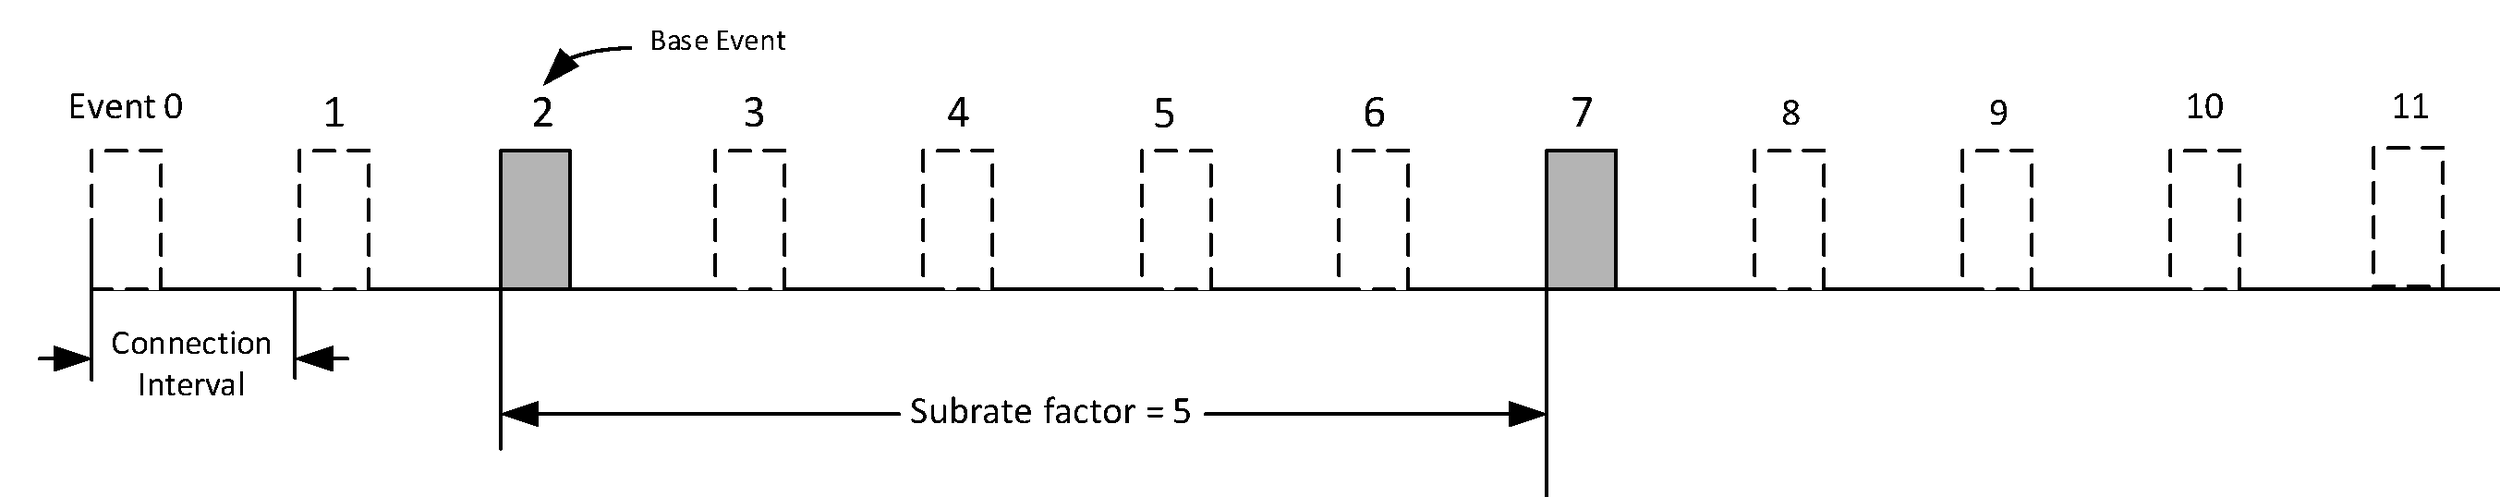 Connection events used when connSubrateFactor = 5 and connSubrateBaseEvent = 2